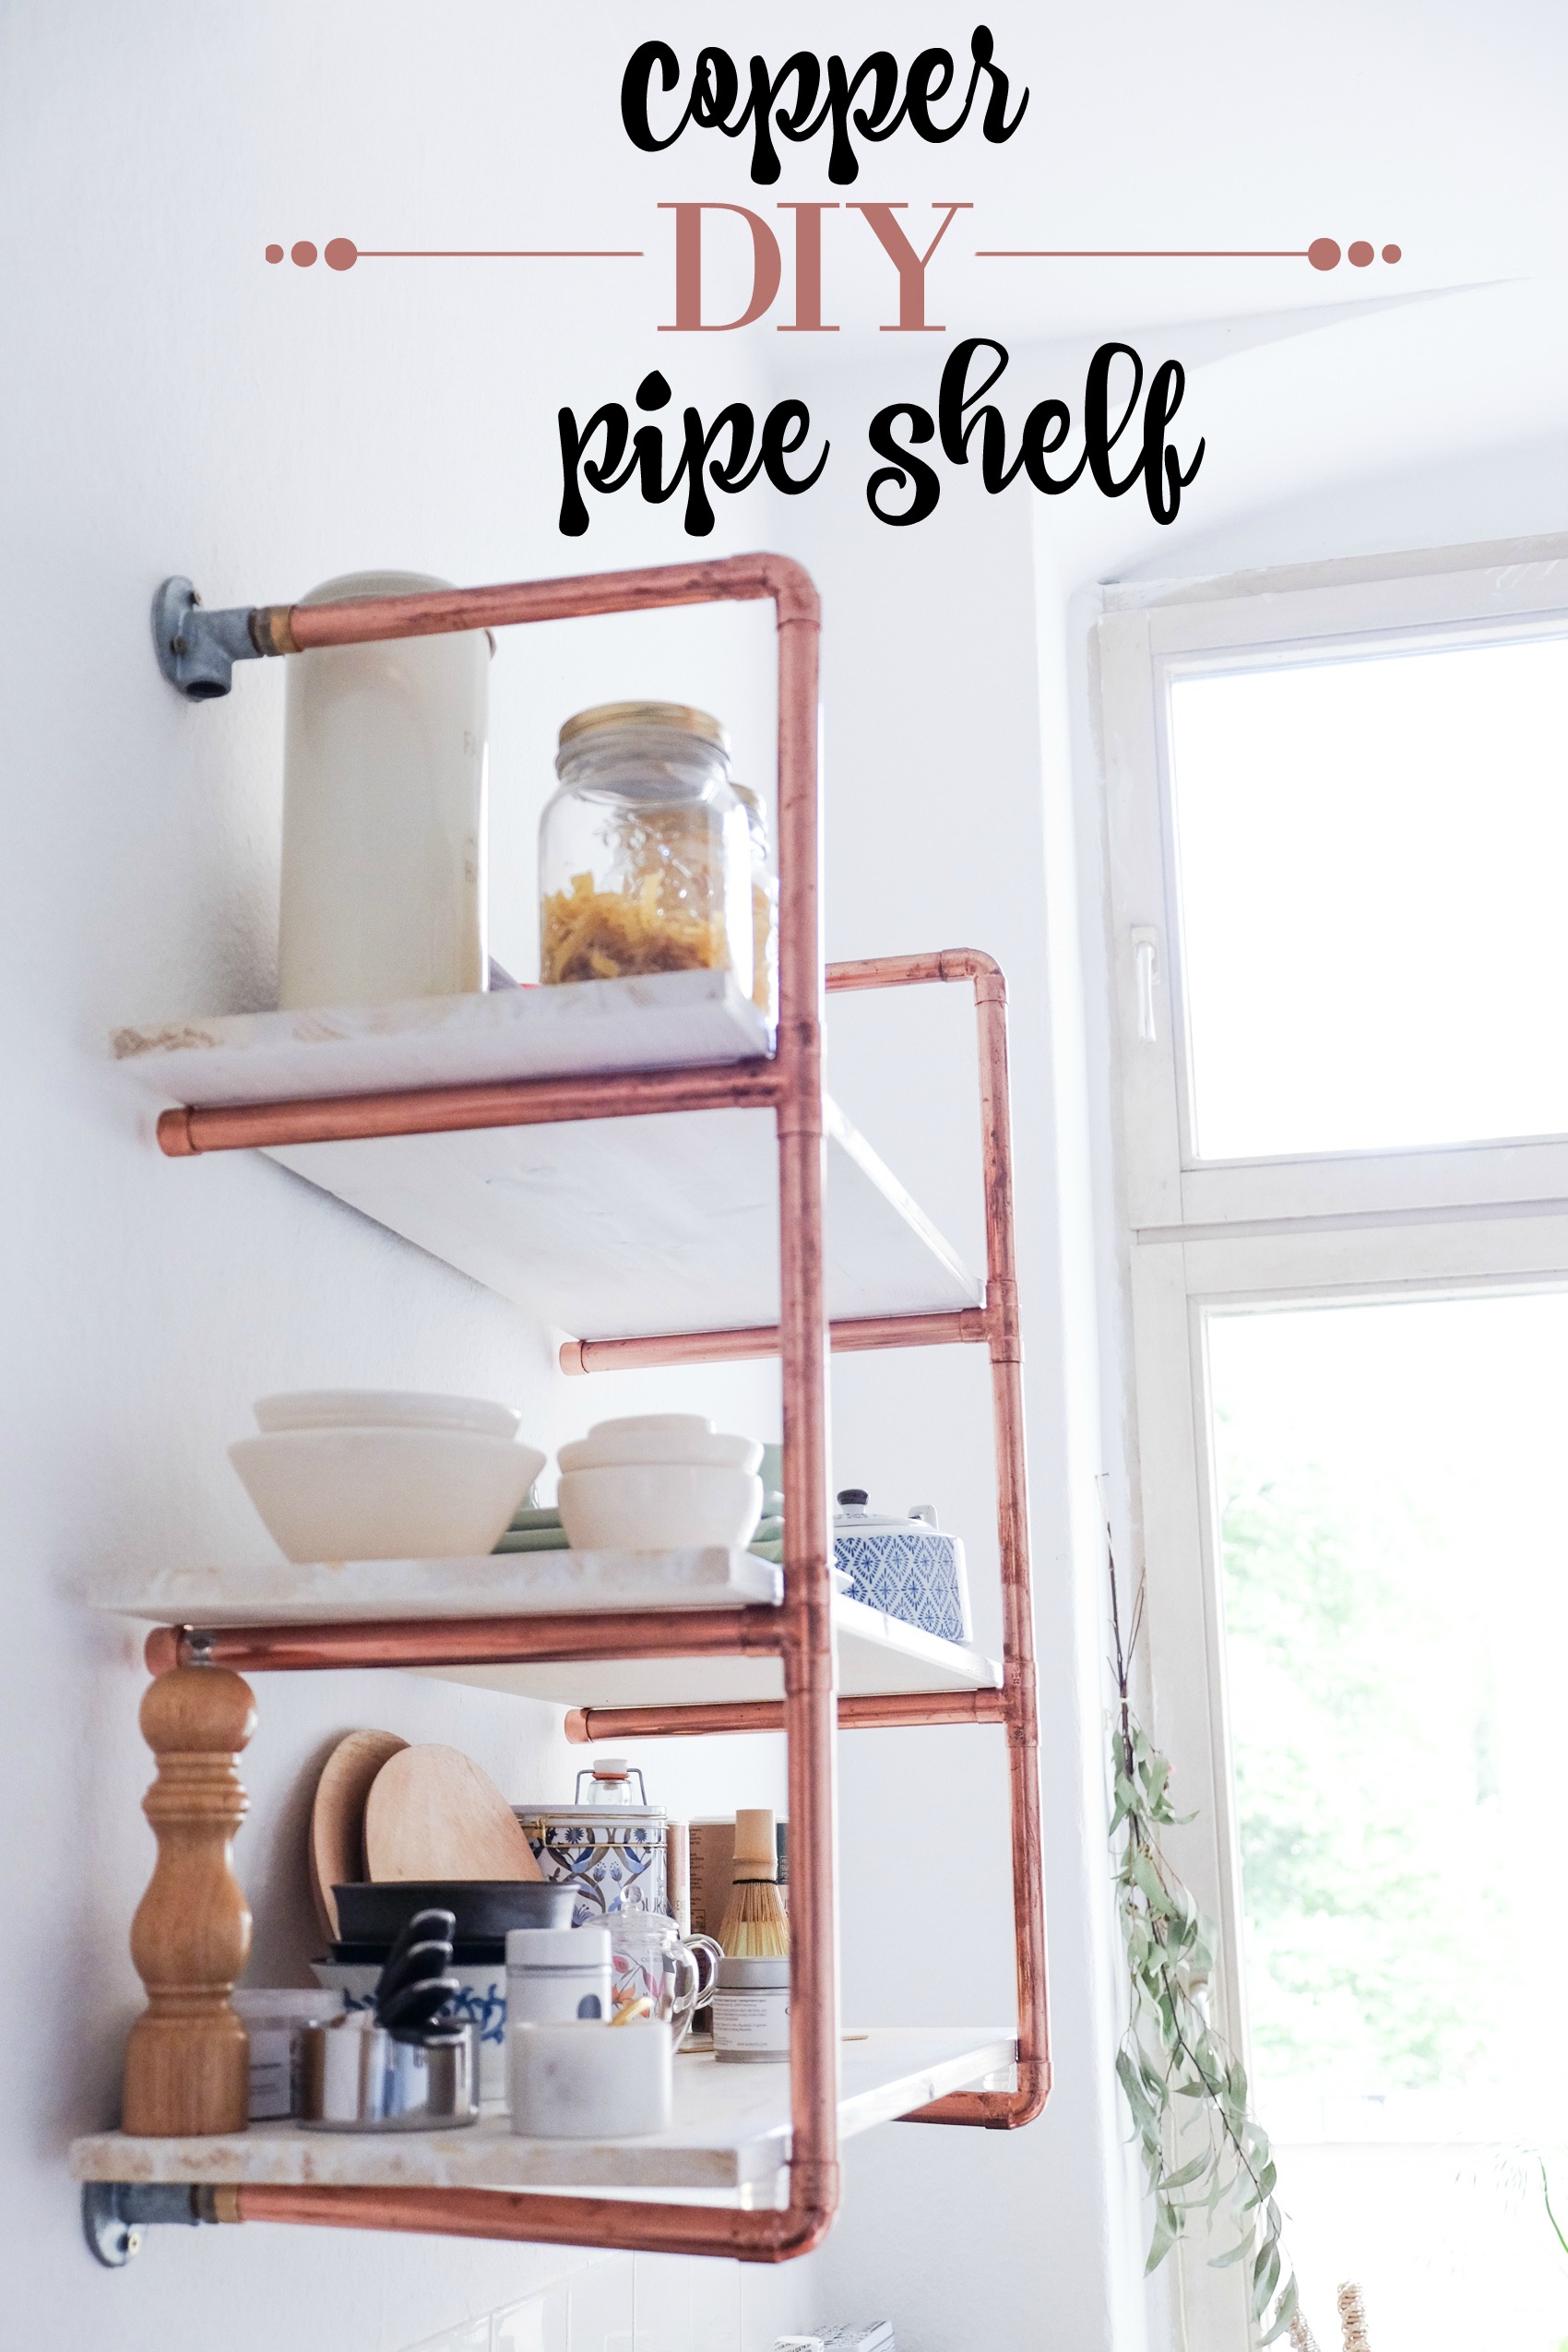 Diy Copper Pipe Shelf Detailed, Shelves Made From Pipes And Wood